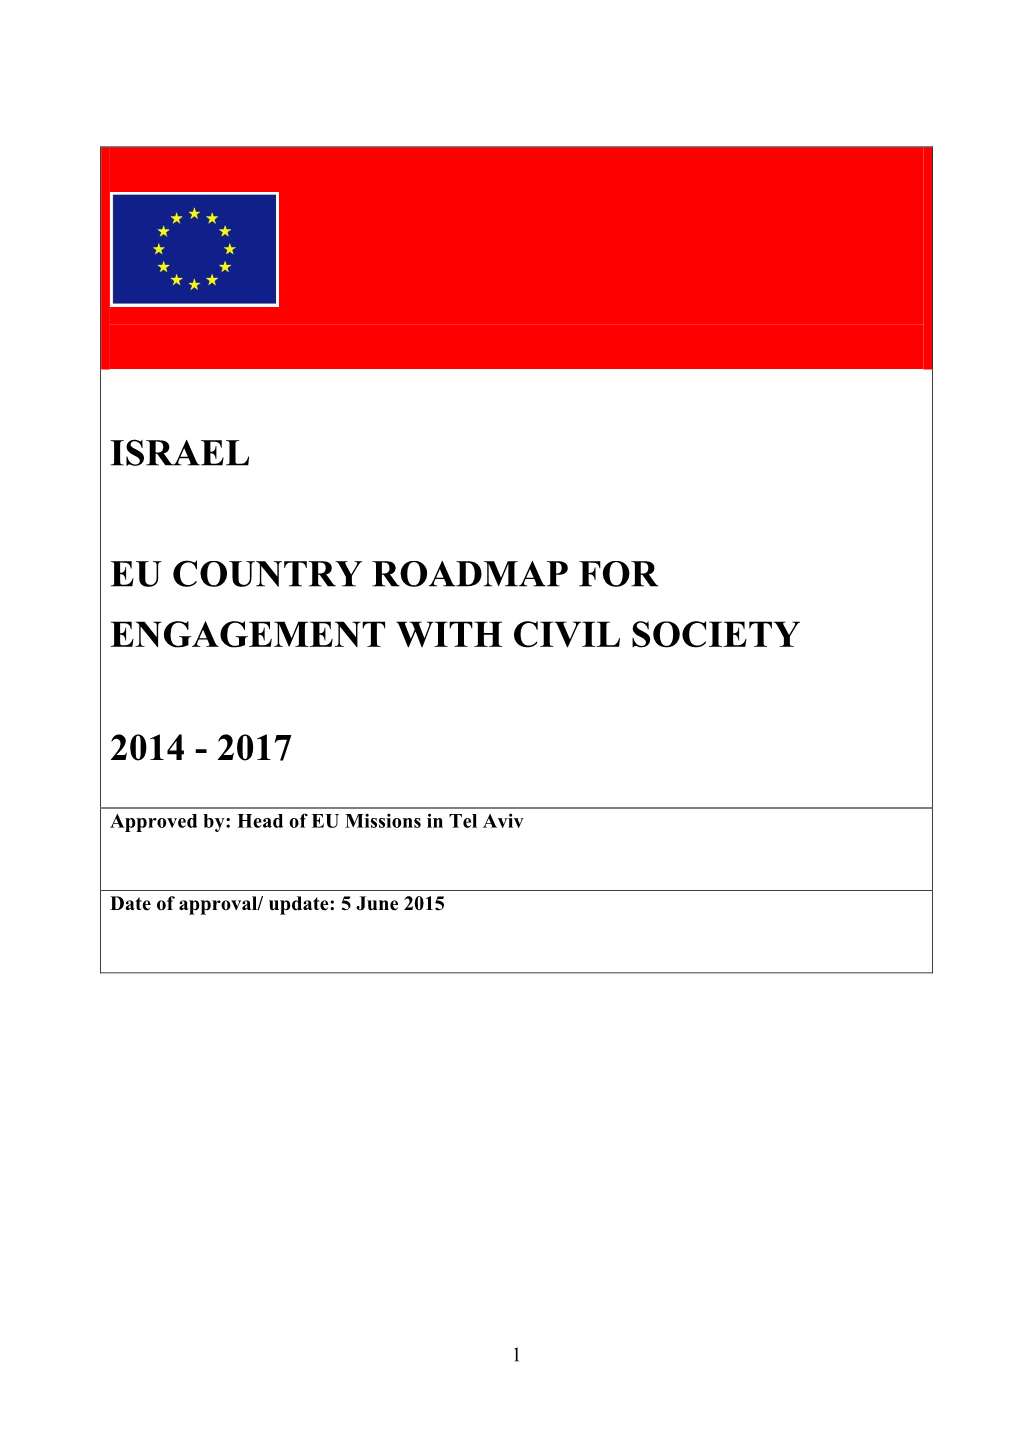 Israel Eu Country Roadmap for Engagement with Civil Society 2014